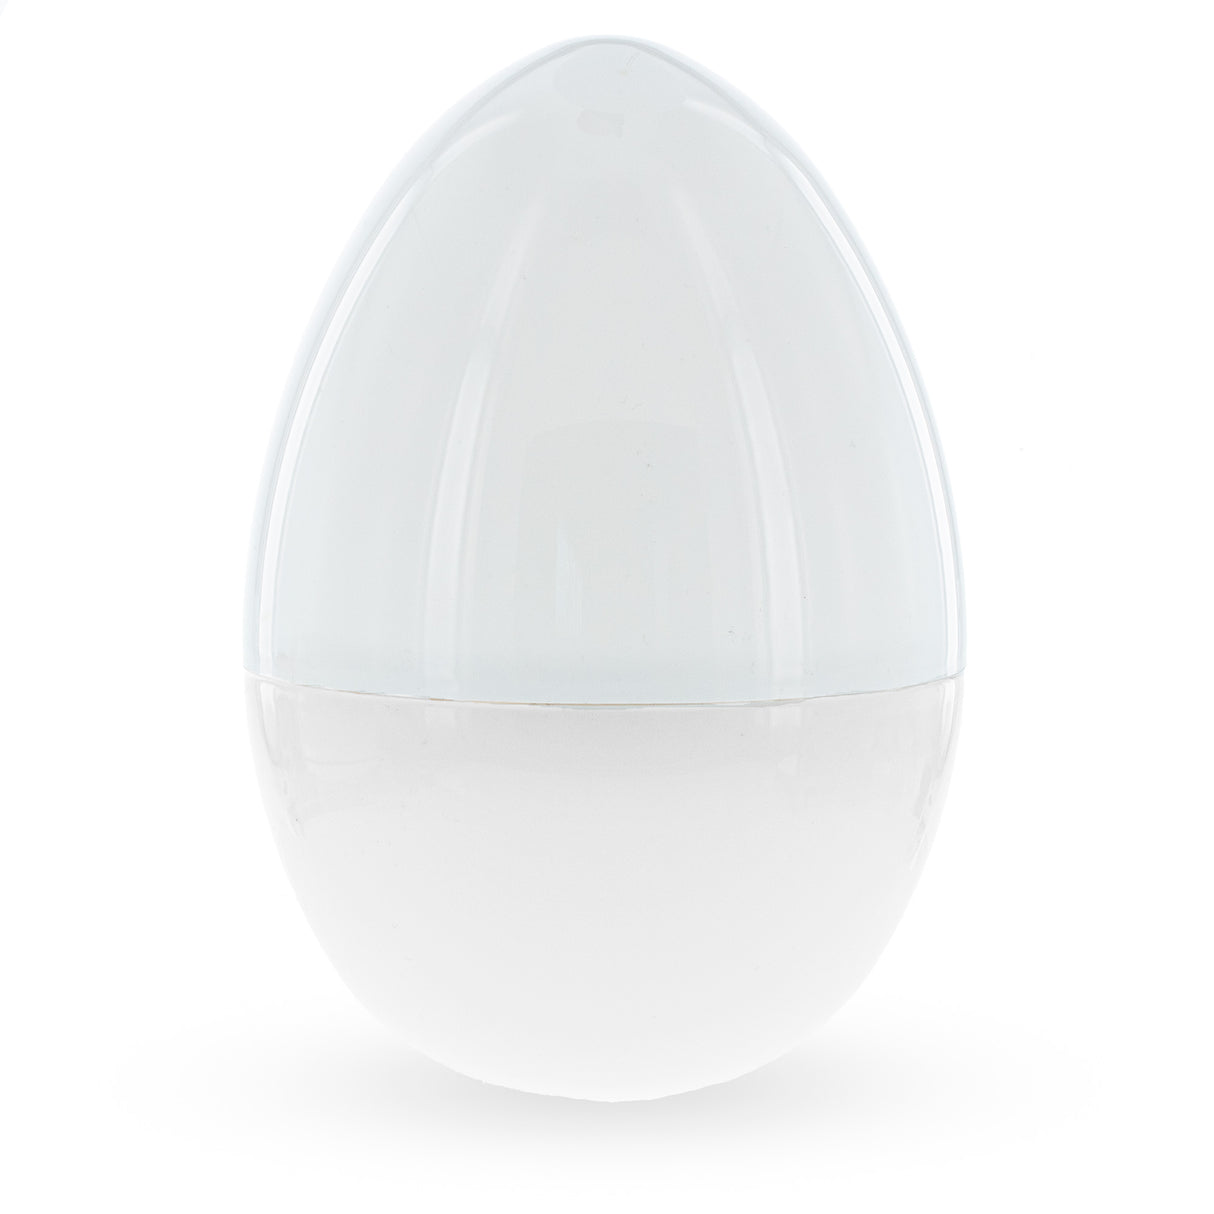 Giant Size Large Two Shades White Plastic Easter Egg 12 Inches in Clear color, Oval shape